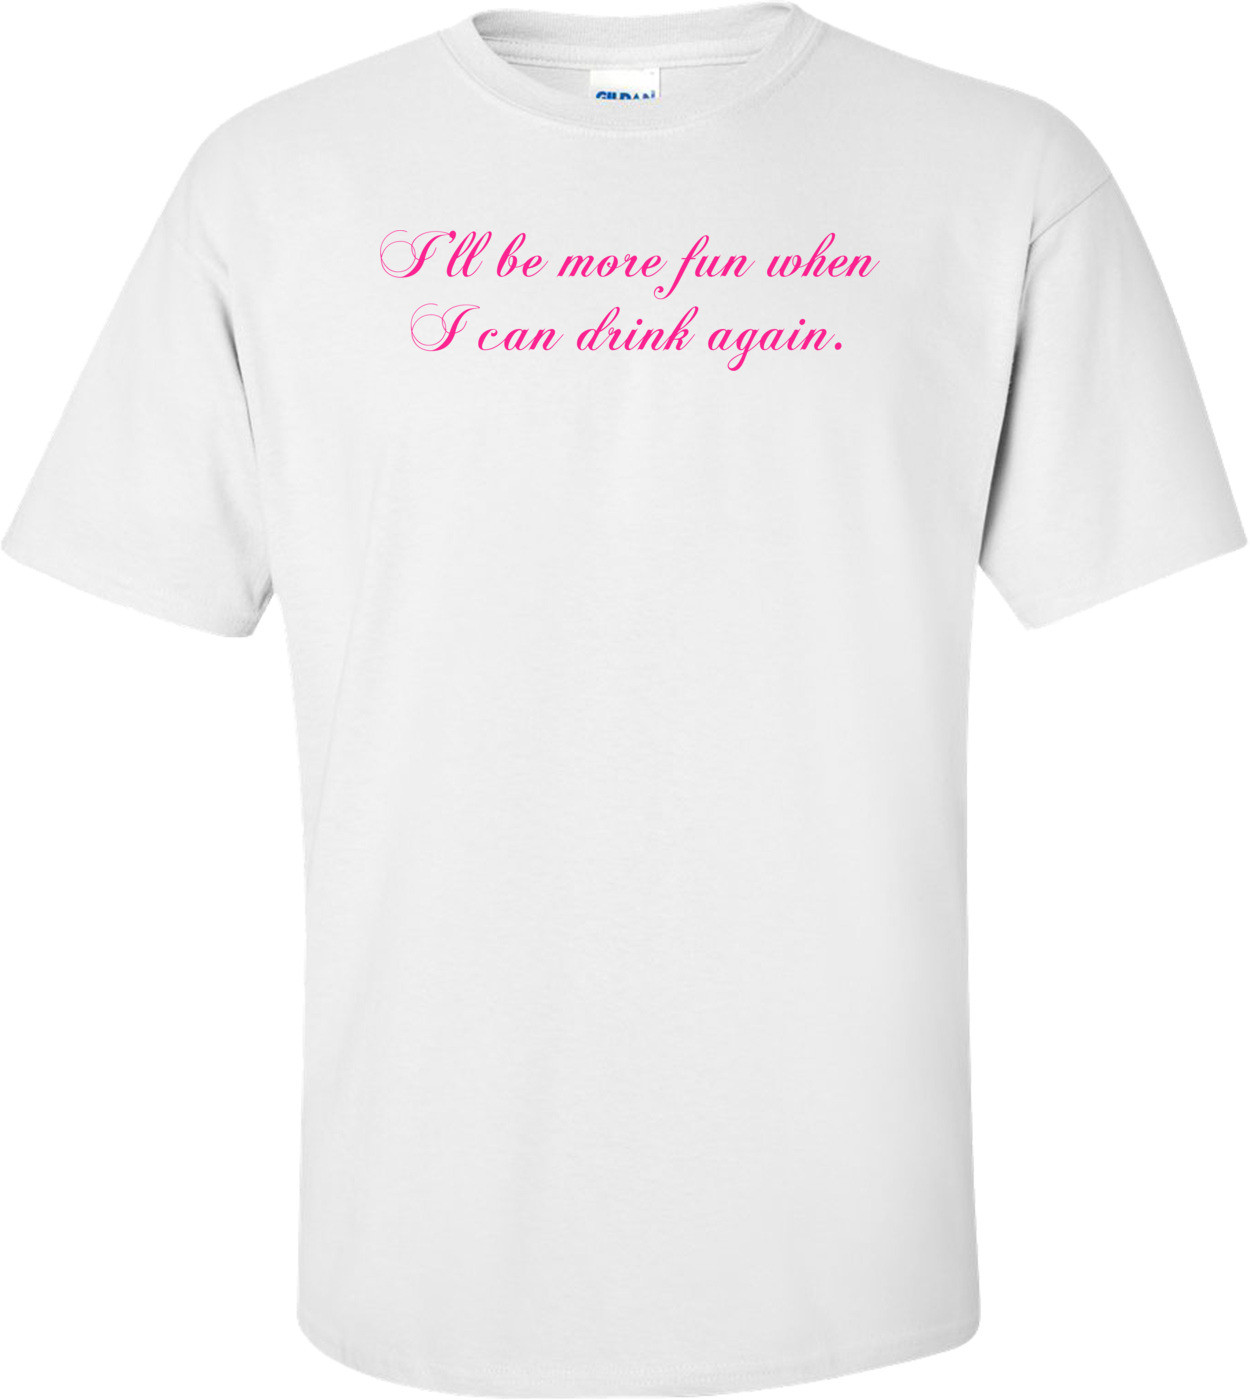 I'll Be More Fun When I Can Drink Again. Shirt